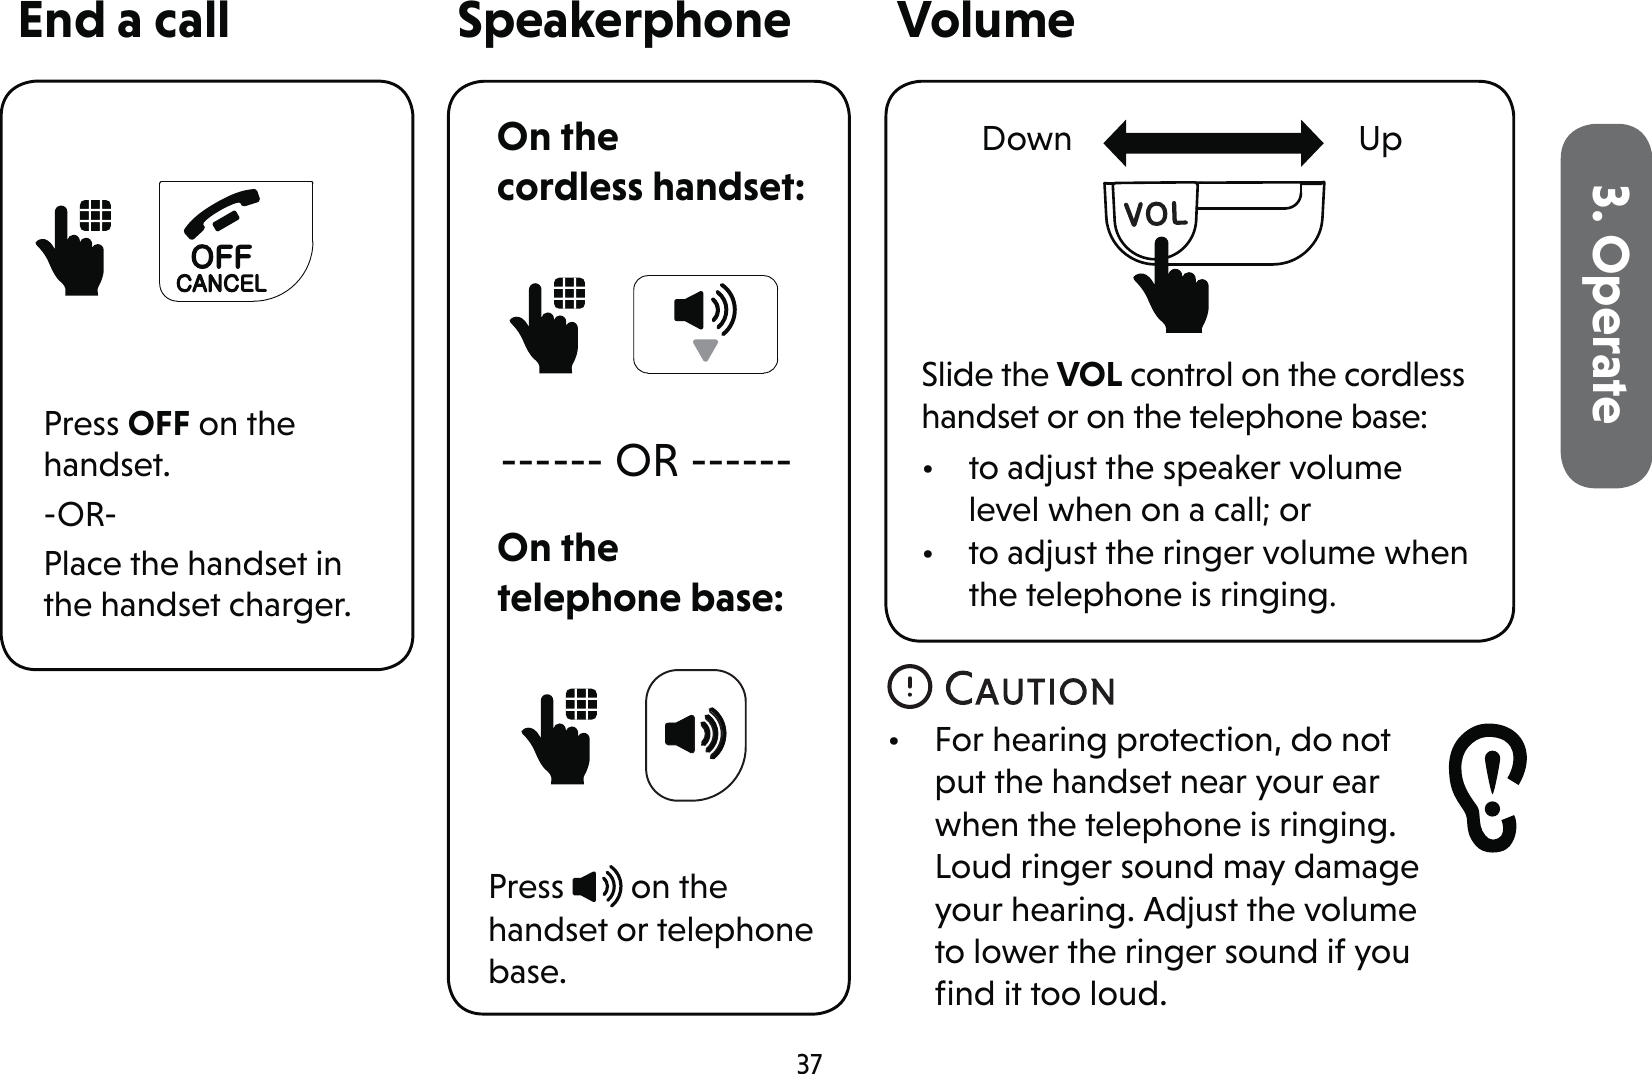 373. OperateEnd a callPress OFF on the handset.-OR-Place the handset in the handset charger.SpeakerphonePress   on the handset or telephone base.Volume------ OR ------Slide the VOL control on the cordless handset or on the telephone base:•  to adjust the speaker volume level when on a call; or •  to adjust the ringer volume when the telephone is ringing.•  For hearing protection, do not put the handset near your ear when the telephone is ringing. Loud ringer sound may damage your hearing. Adjust the volume to lower the ringer sound if you ﬁnd it too loud.UpDownOn the telephone base:On the  cordless handset: